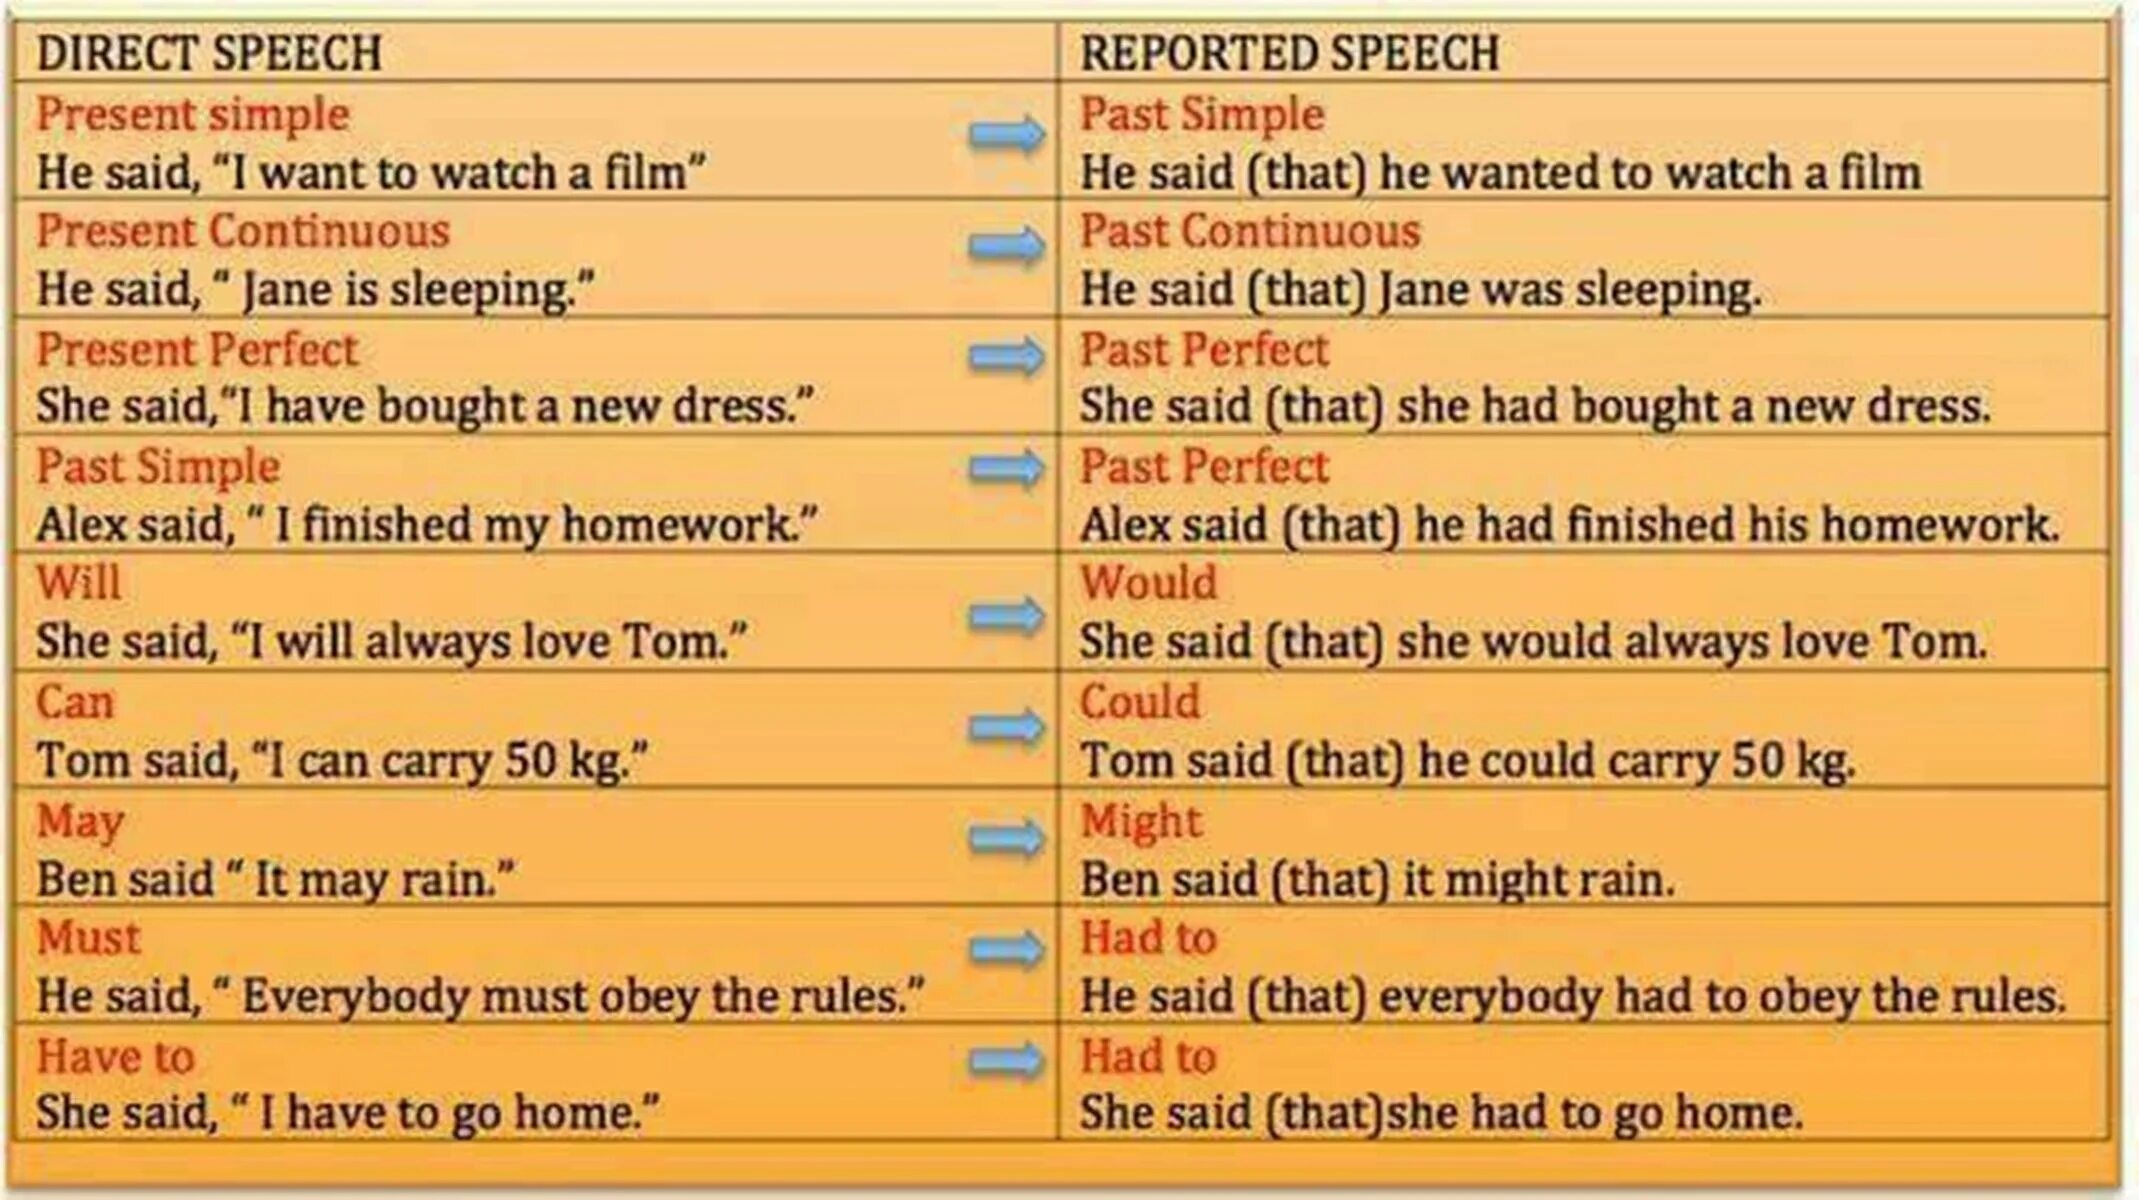 Does your sister work. Английский язык direct reported Speech. Direct Speech reported Speech таблица. Direct and reported Speech правила таблица. Direct indirect Speech таблица.